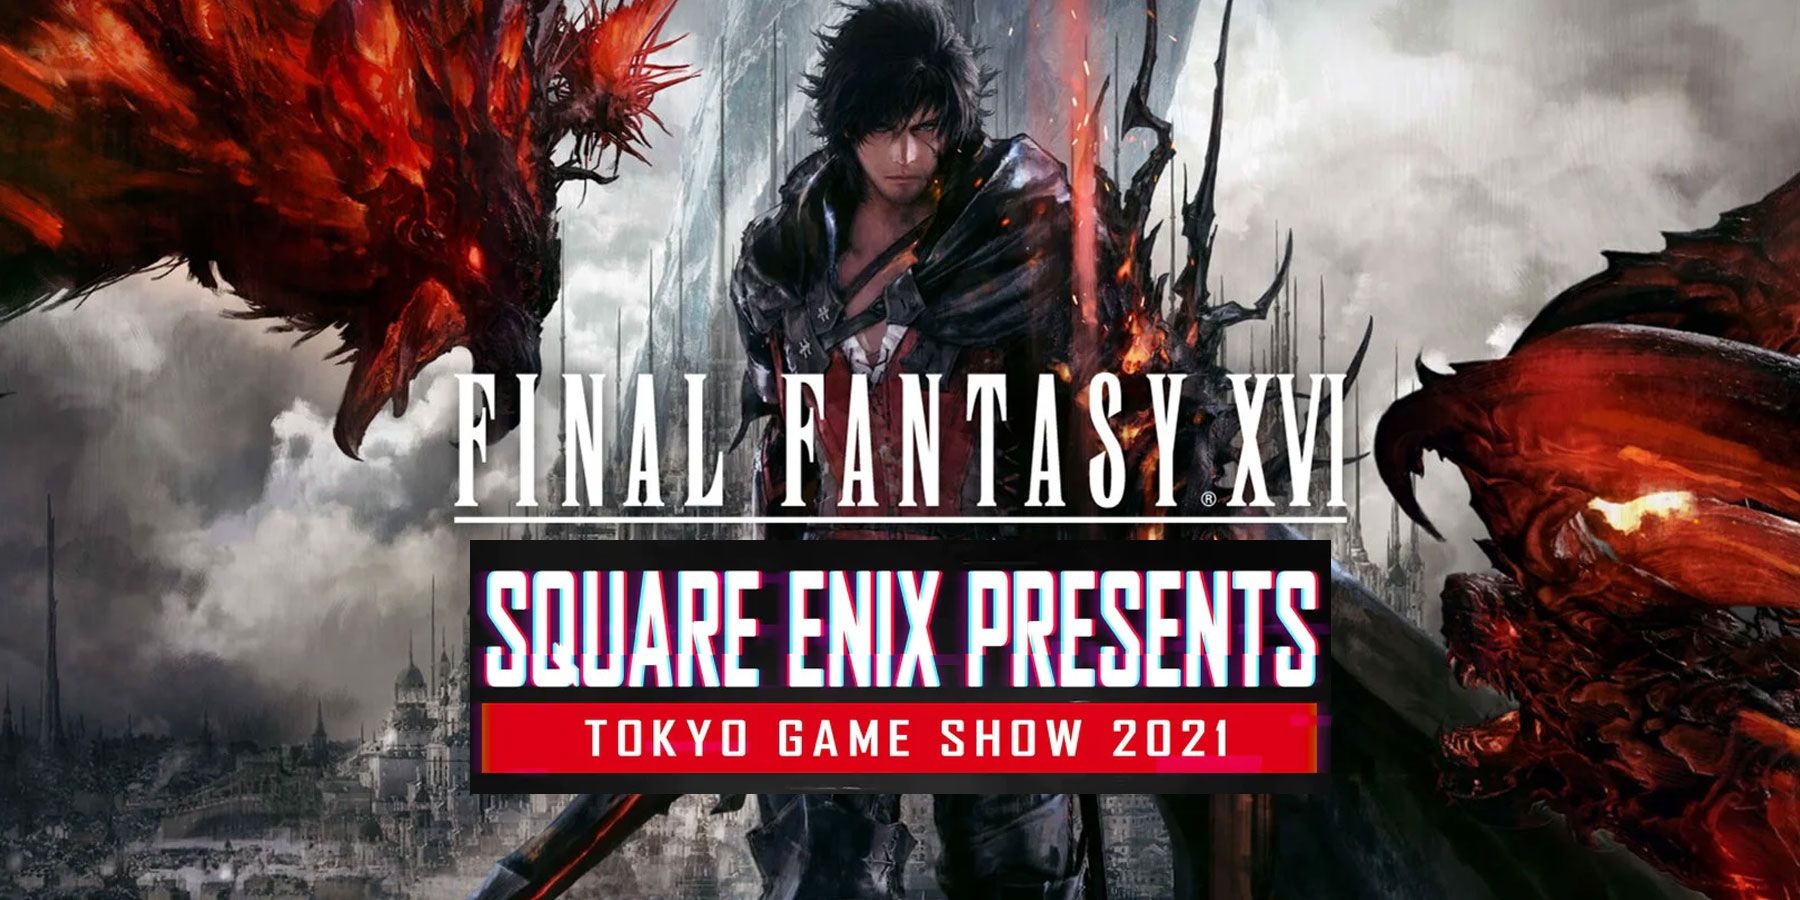 Final Fantasy 16 Absent in Square Enix Tokio Game Show 2021